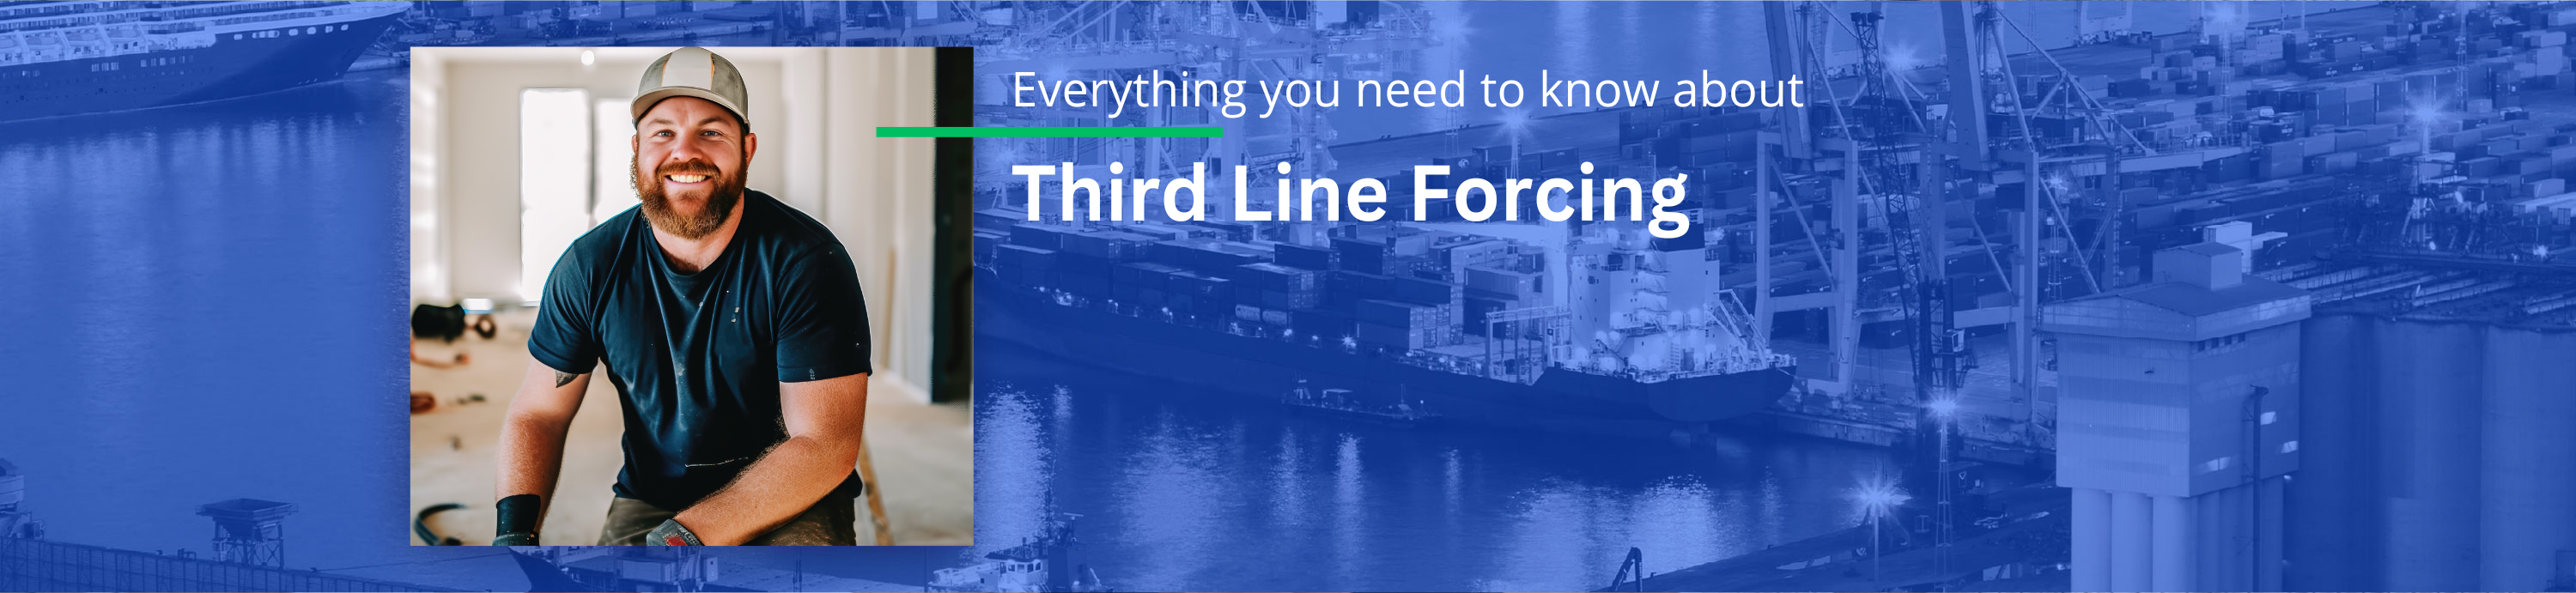 Third Line Forcing – What is it? What are my Rights?